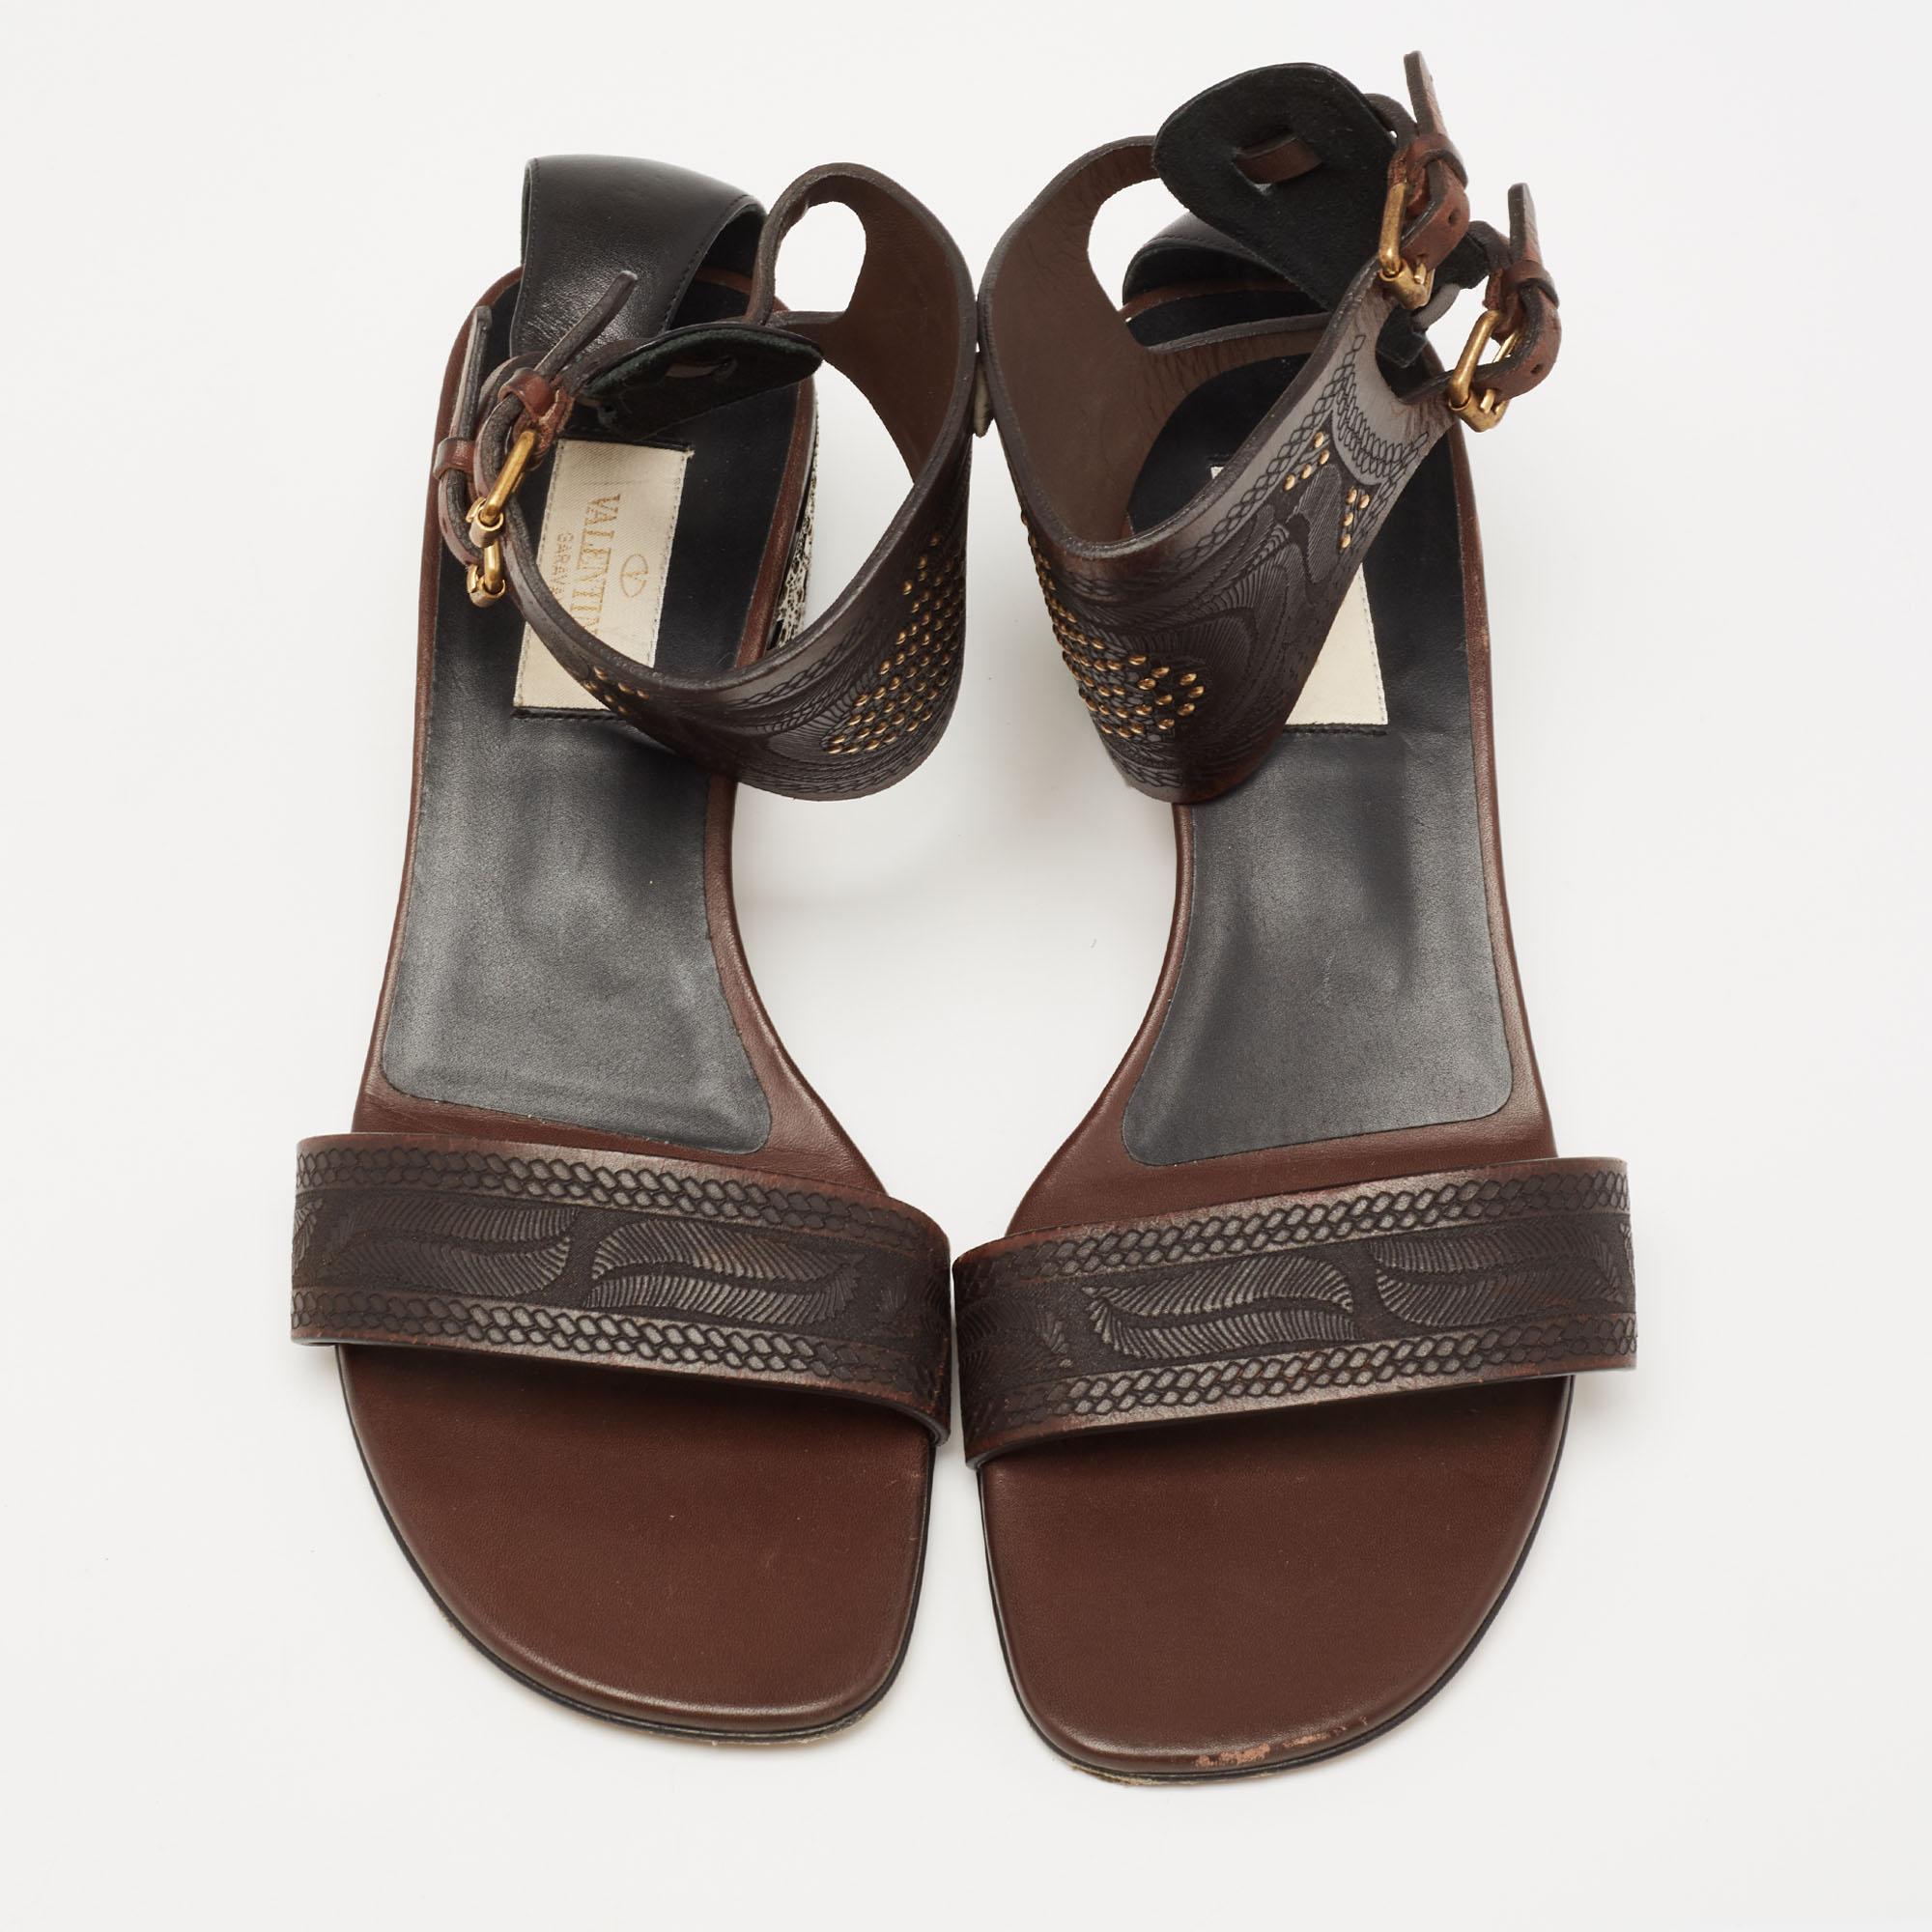 These sandals from the House of Valentino are all about class and elegance! They are made from brown leather, which is highlighted with studded embellishments. They display gold-tone hardware, block heels, and an ankle strap. Flaunt your chic style